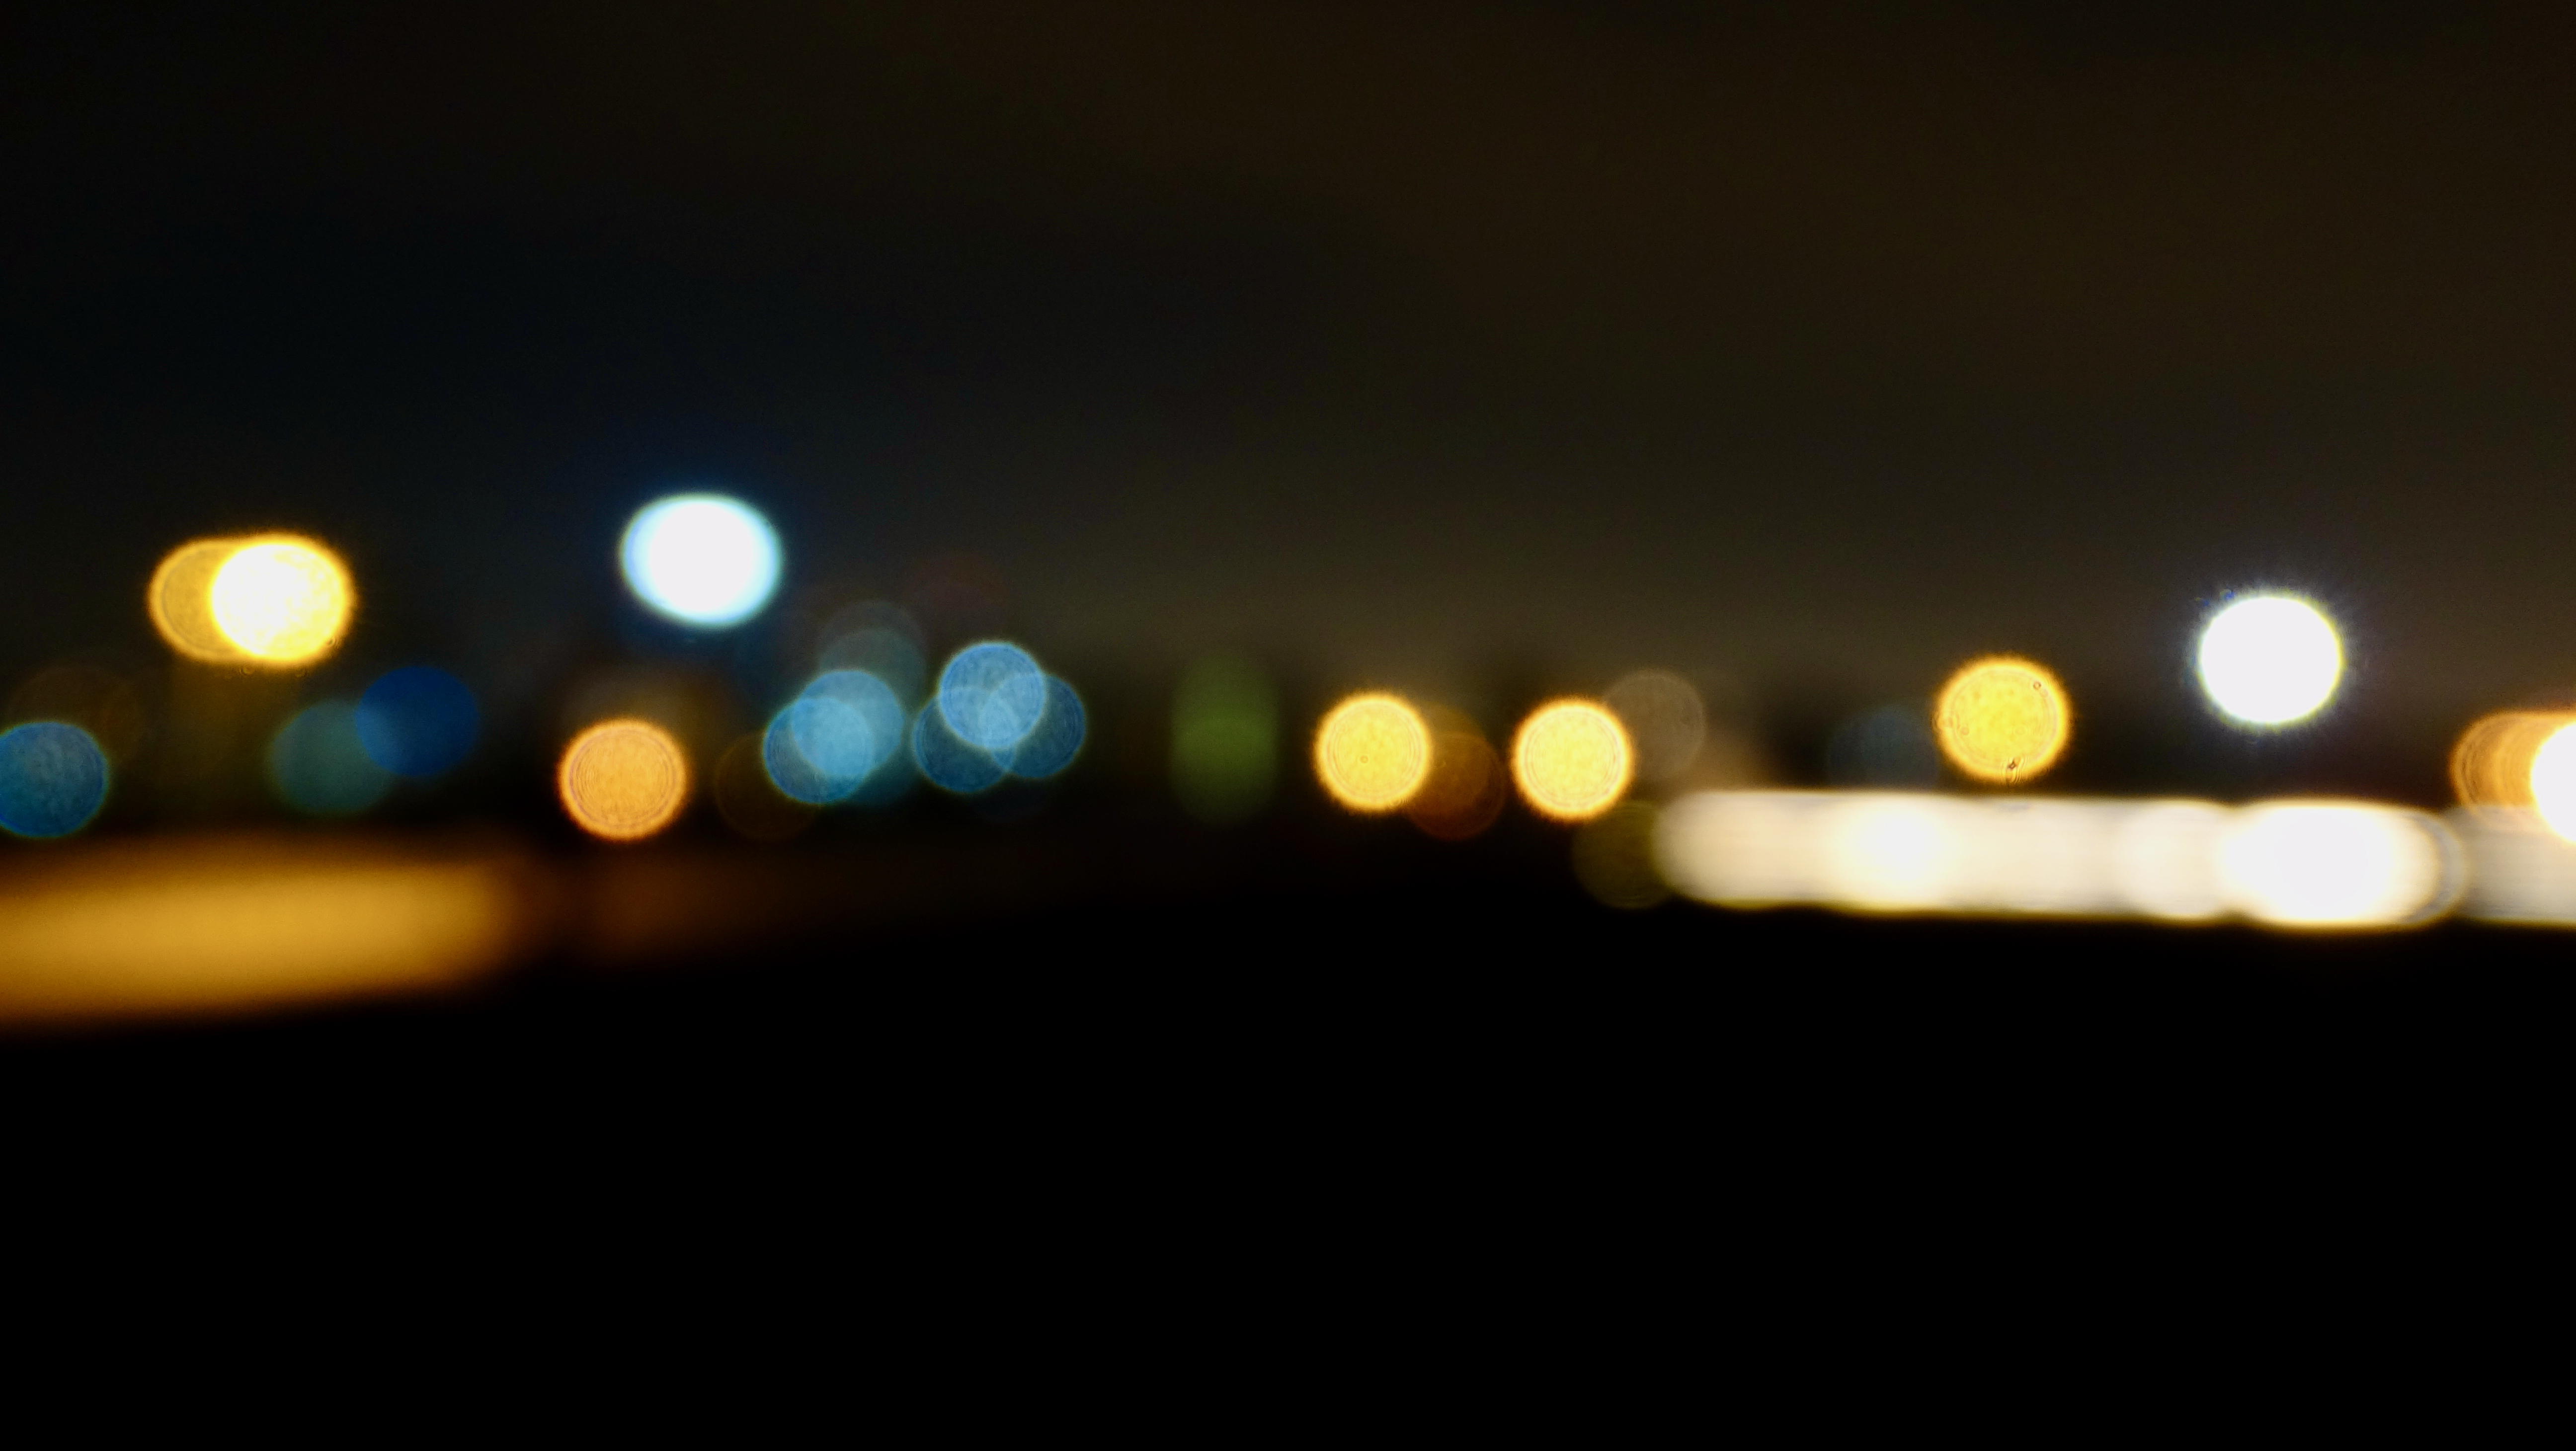 Out of focus night